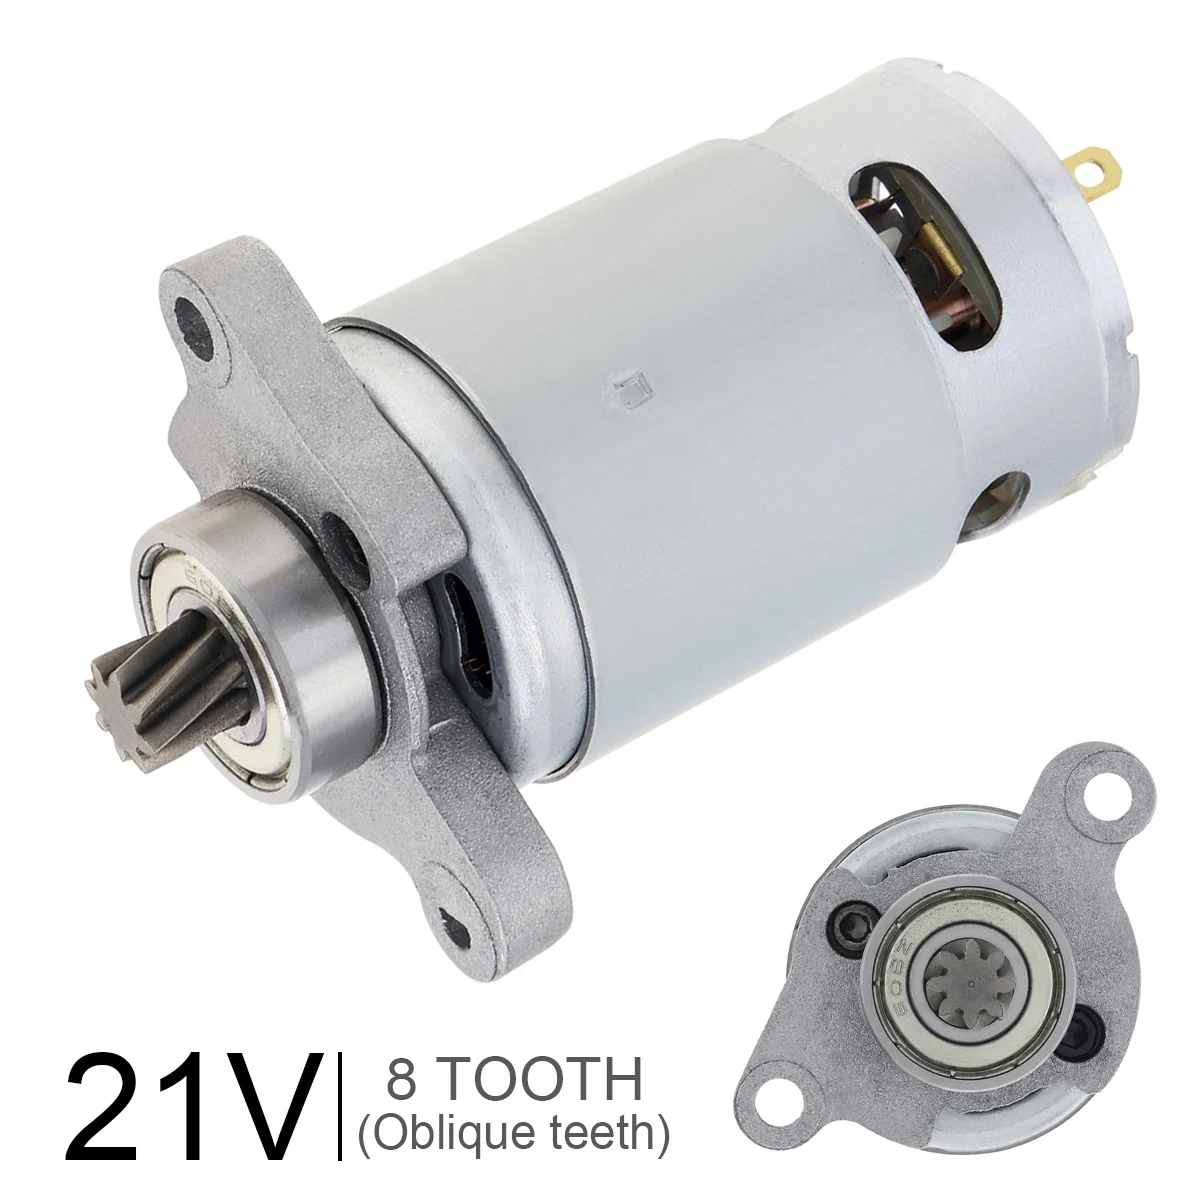 RS550 8 Teeth DC Motor High Power Reciprocating Saw Motor with Helical Teeth Gear for Electric Saber Saw Lithium Electric Saw